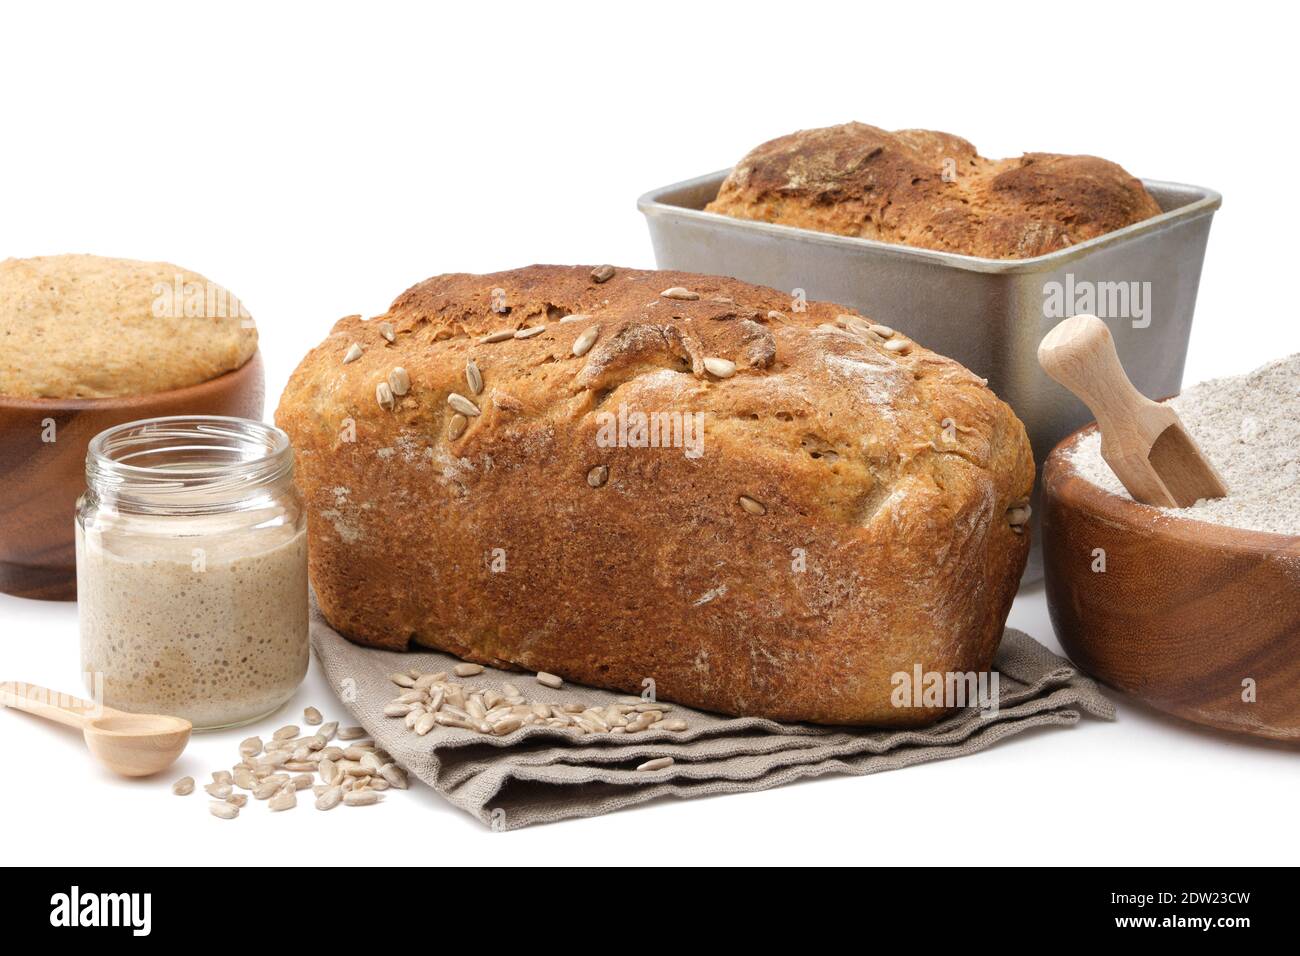 https://c8.alamy.com/comp/2DW23CW/homemade-sourdough-bread-natural-leaven-for-bread-in-a-glass-jar-wooden-bowl-of-dough-and-bowl-of-flour-on-white-2DW23CW.jpg